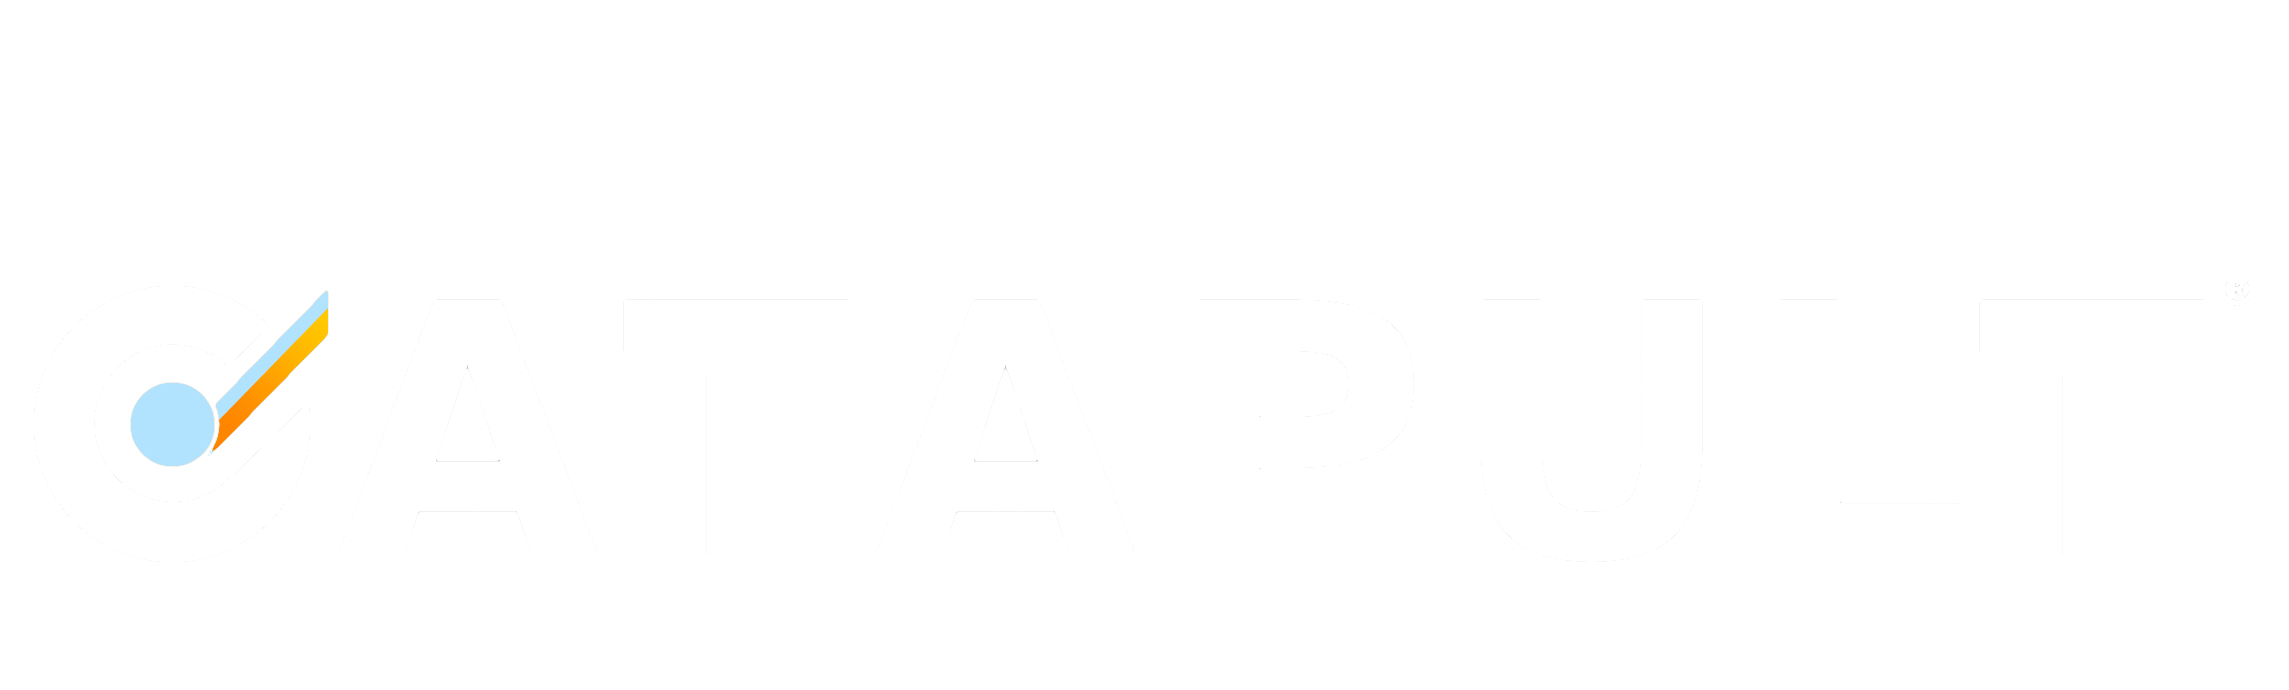 Powered by Catapult Logo